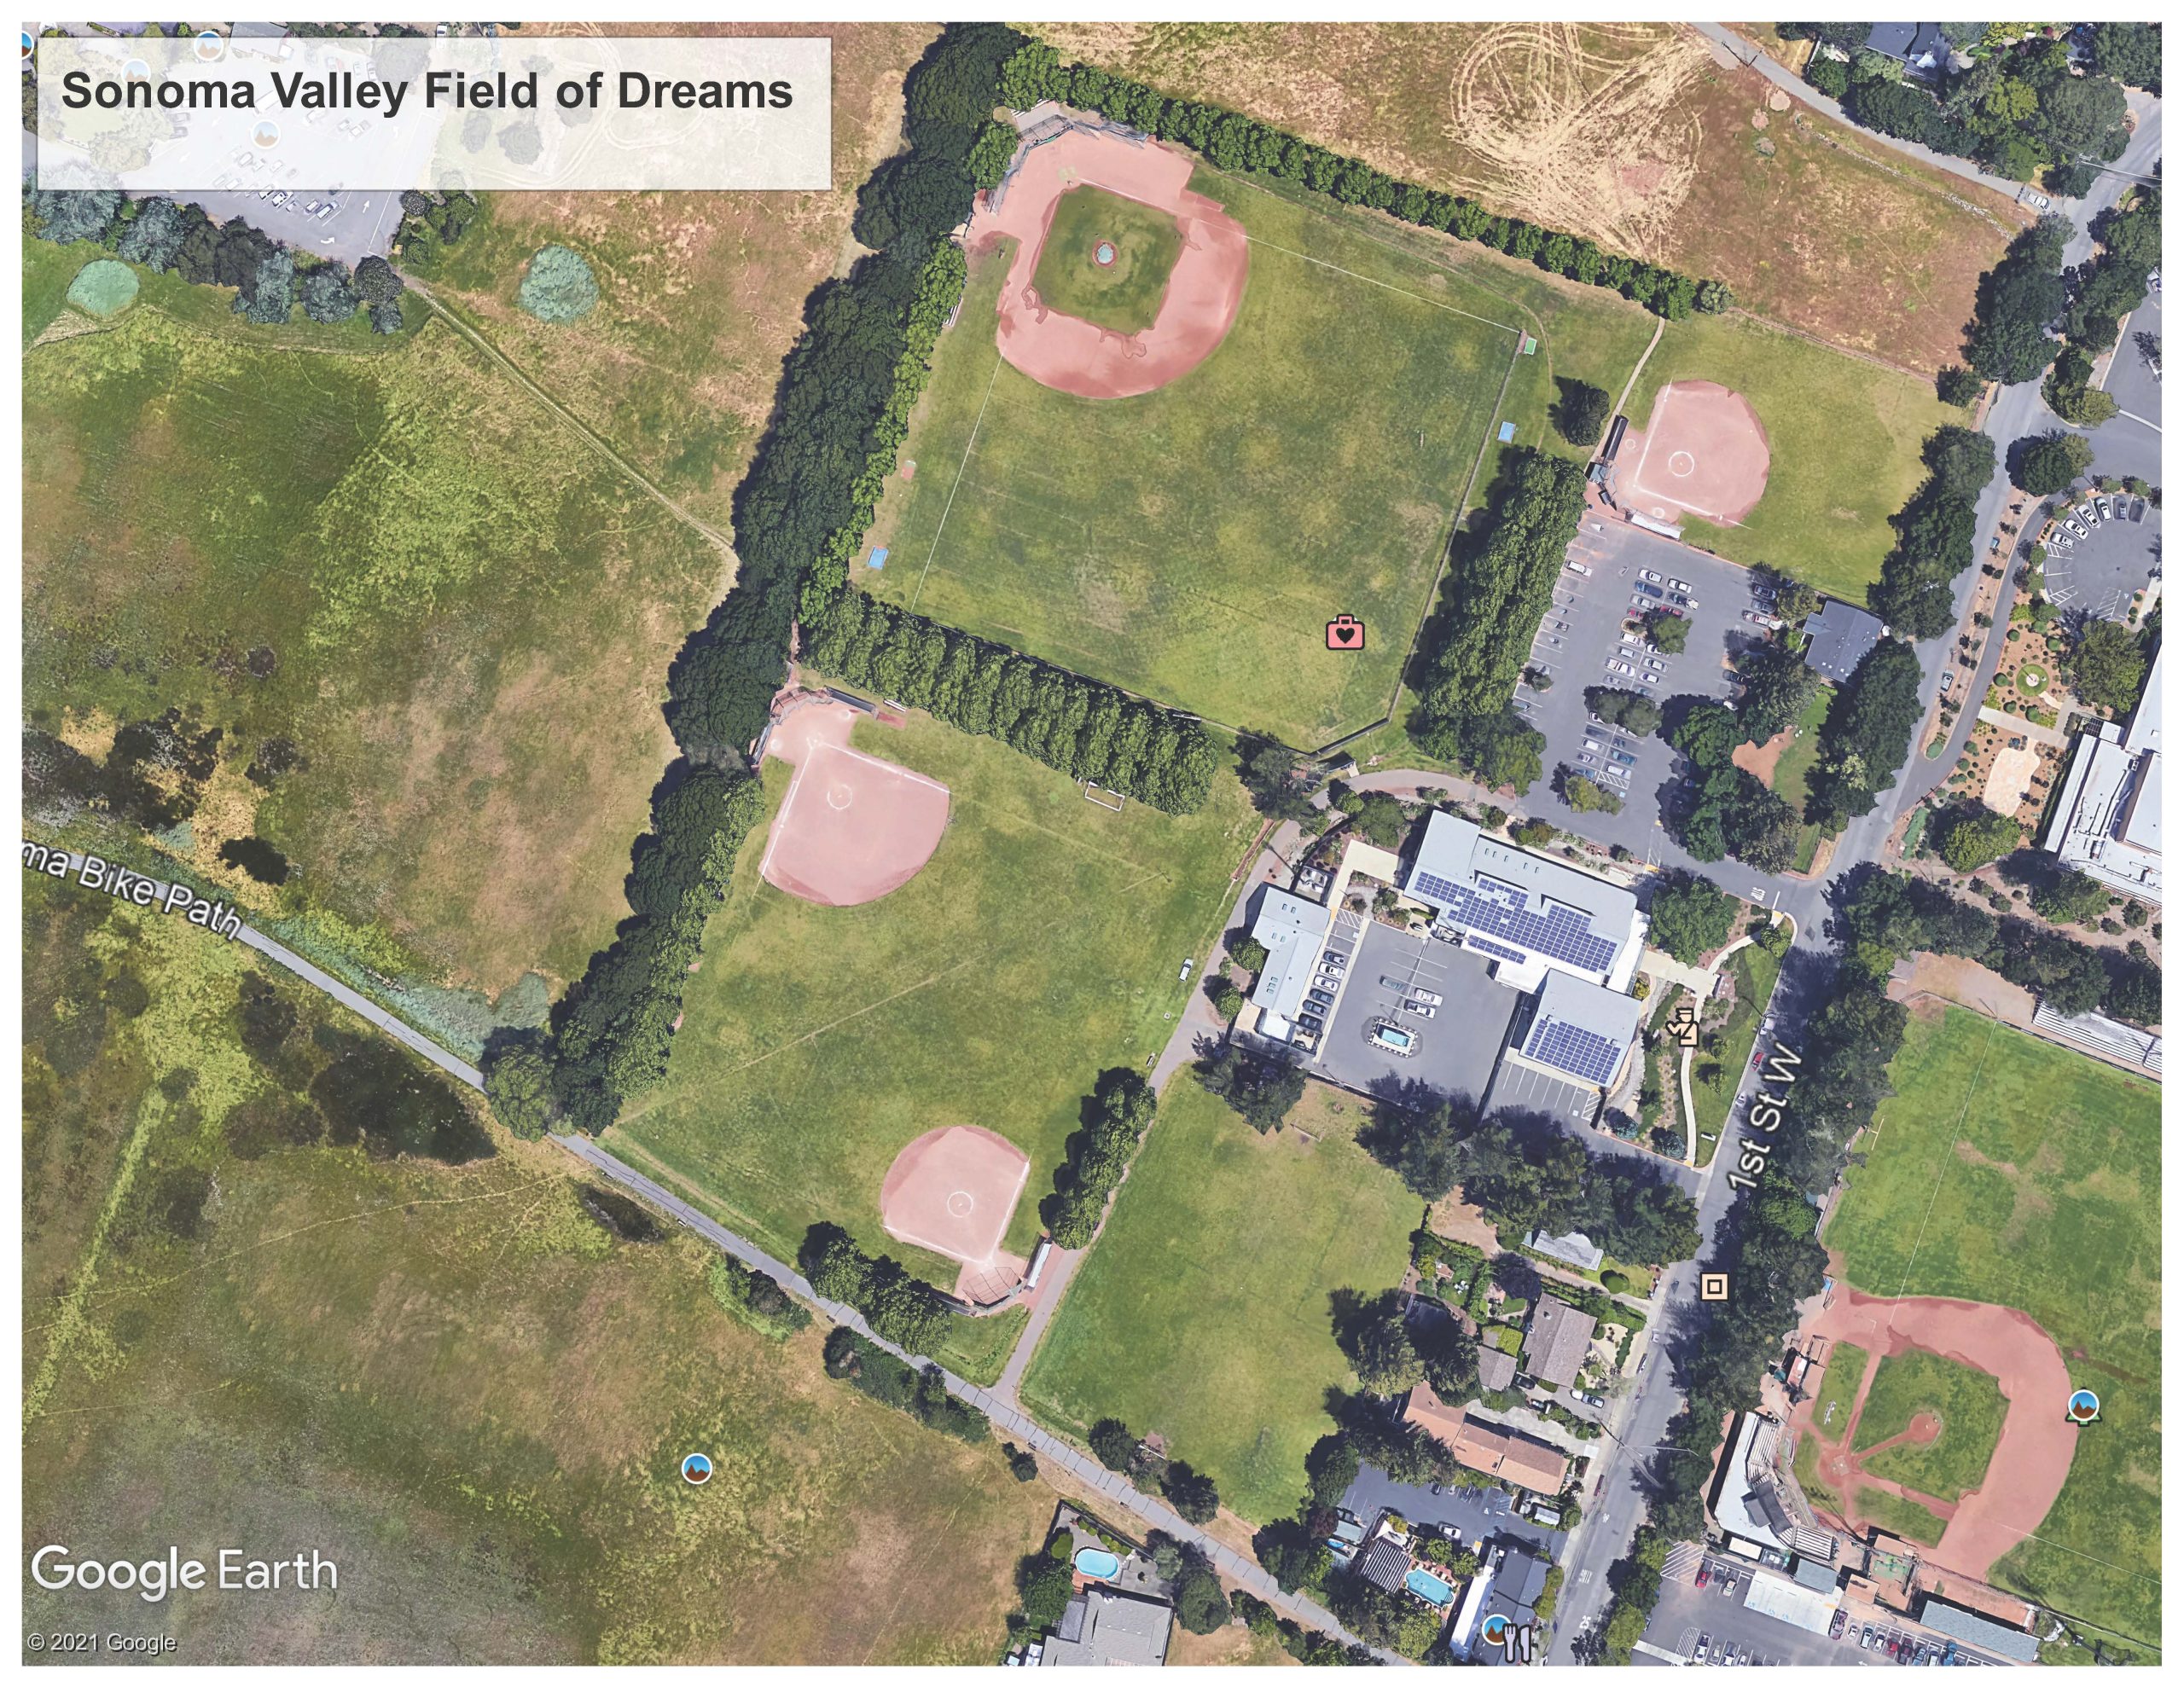 Overhead view of softball and soccer fields.